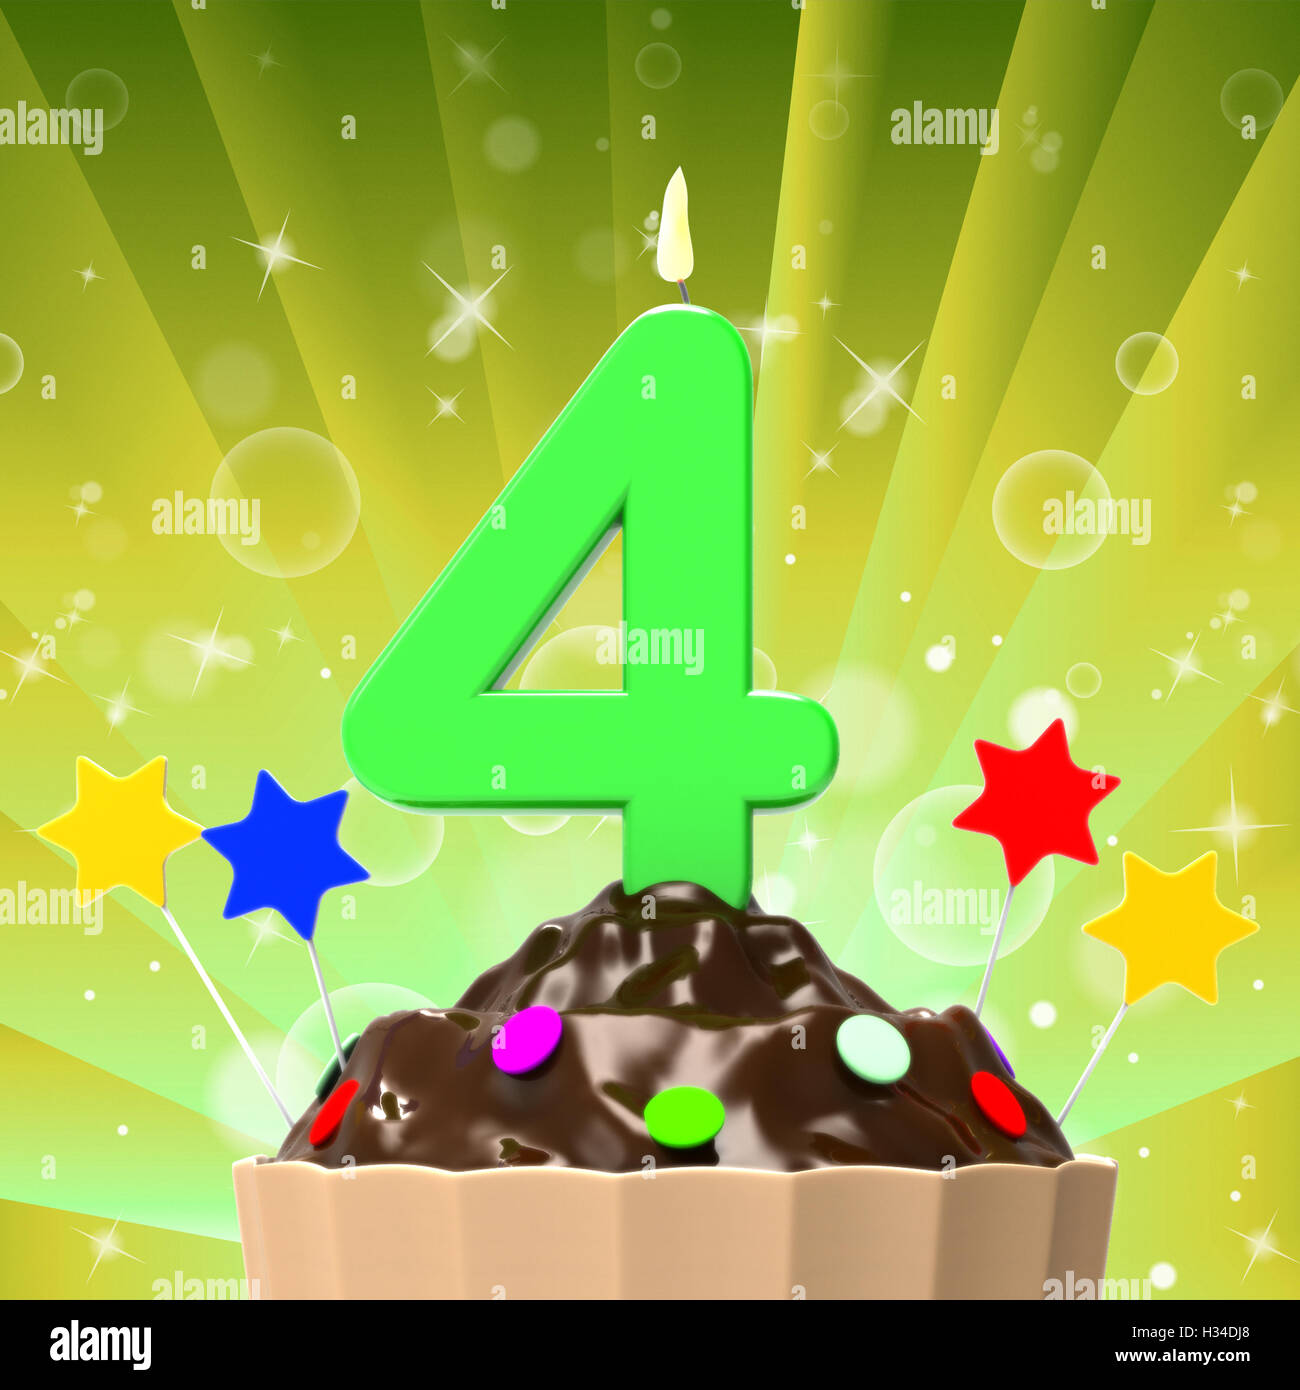 Four Candle On Cupcake Means Anniversary Party Or Happiness Stock Photo